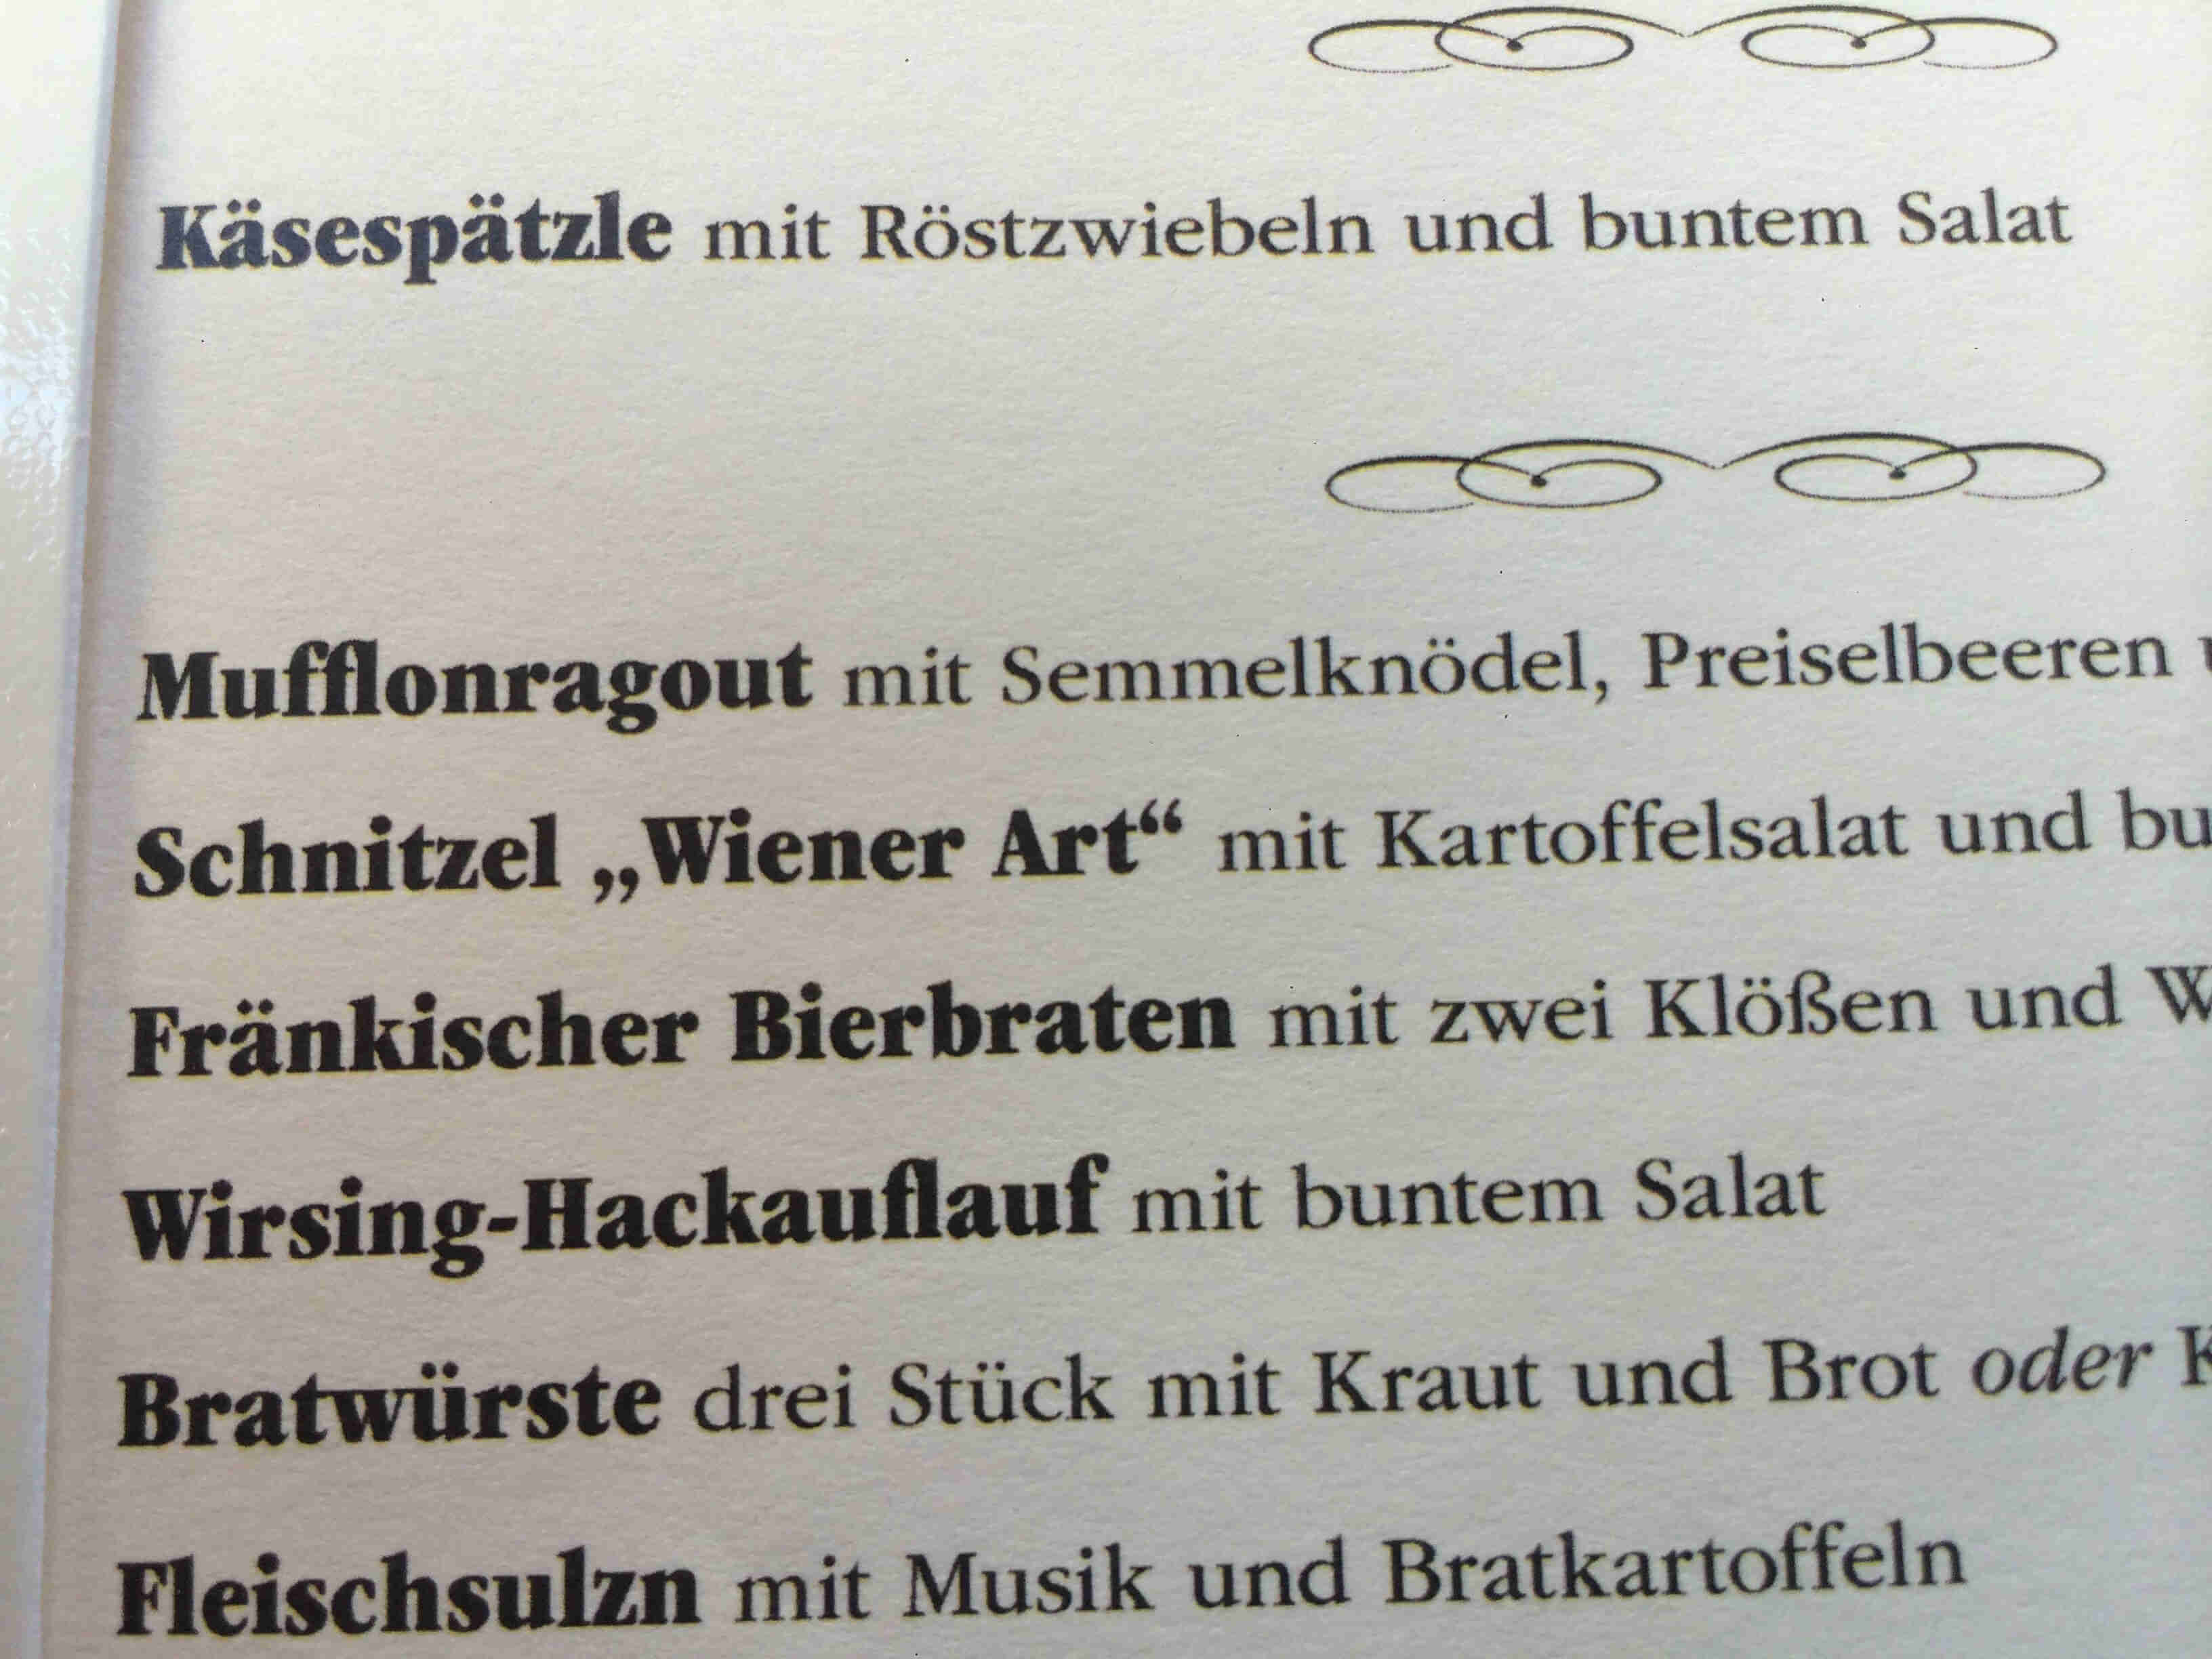 Close up view of a German food menu, on white paper with black text